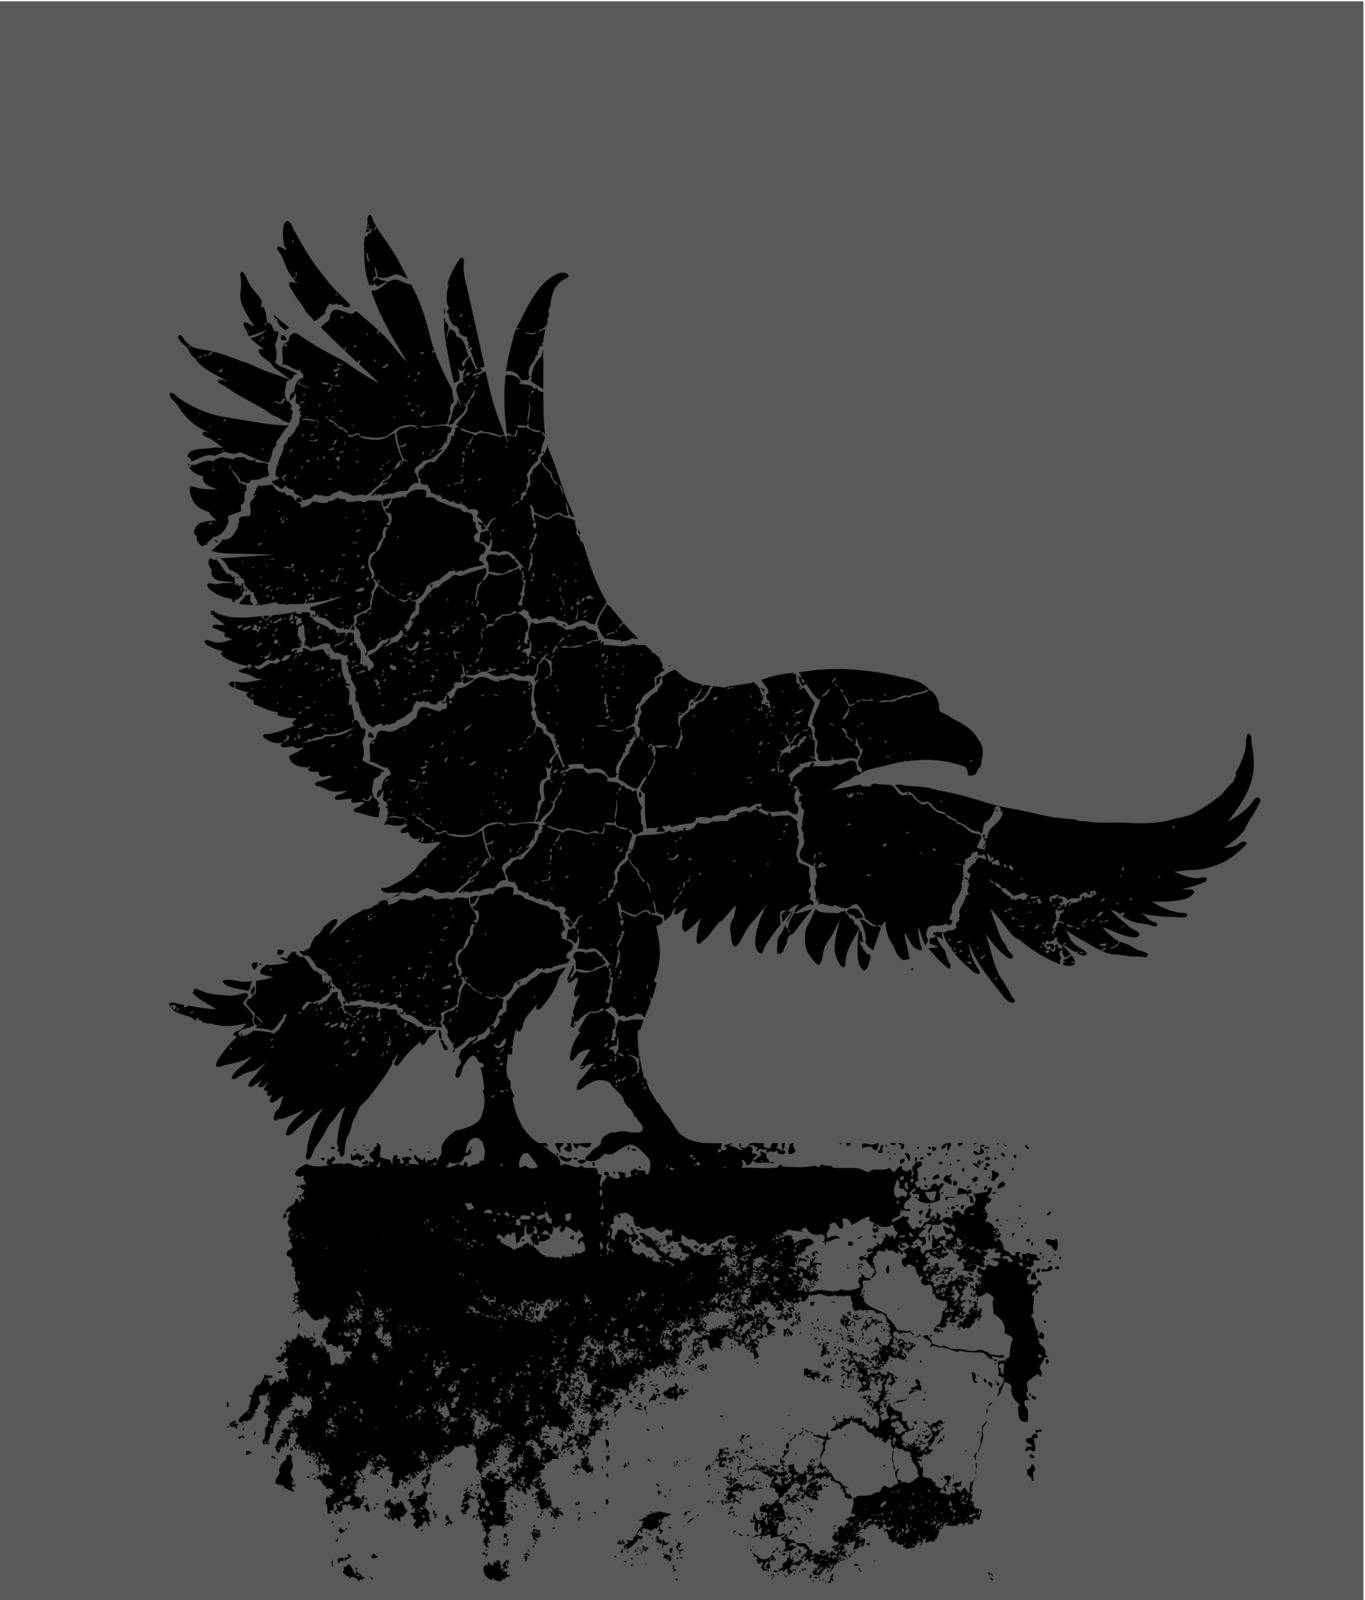 grunge background vintage eagle vectro t by a1vector